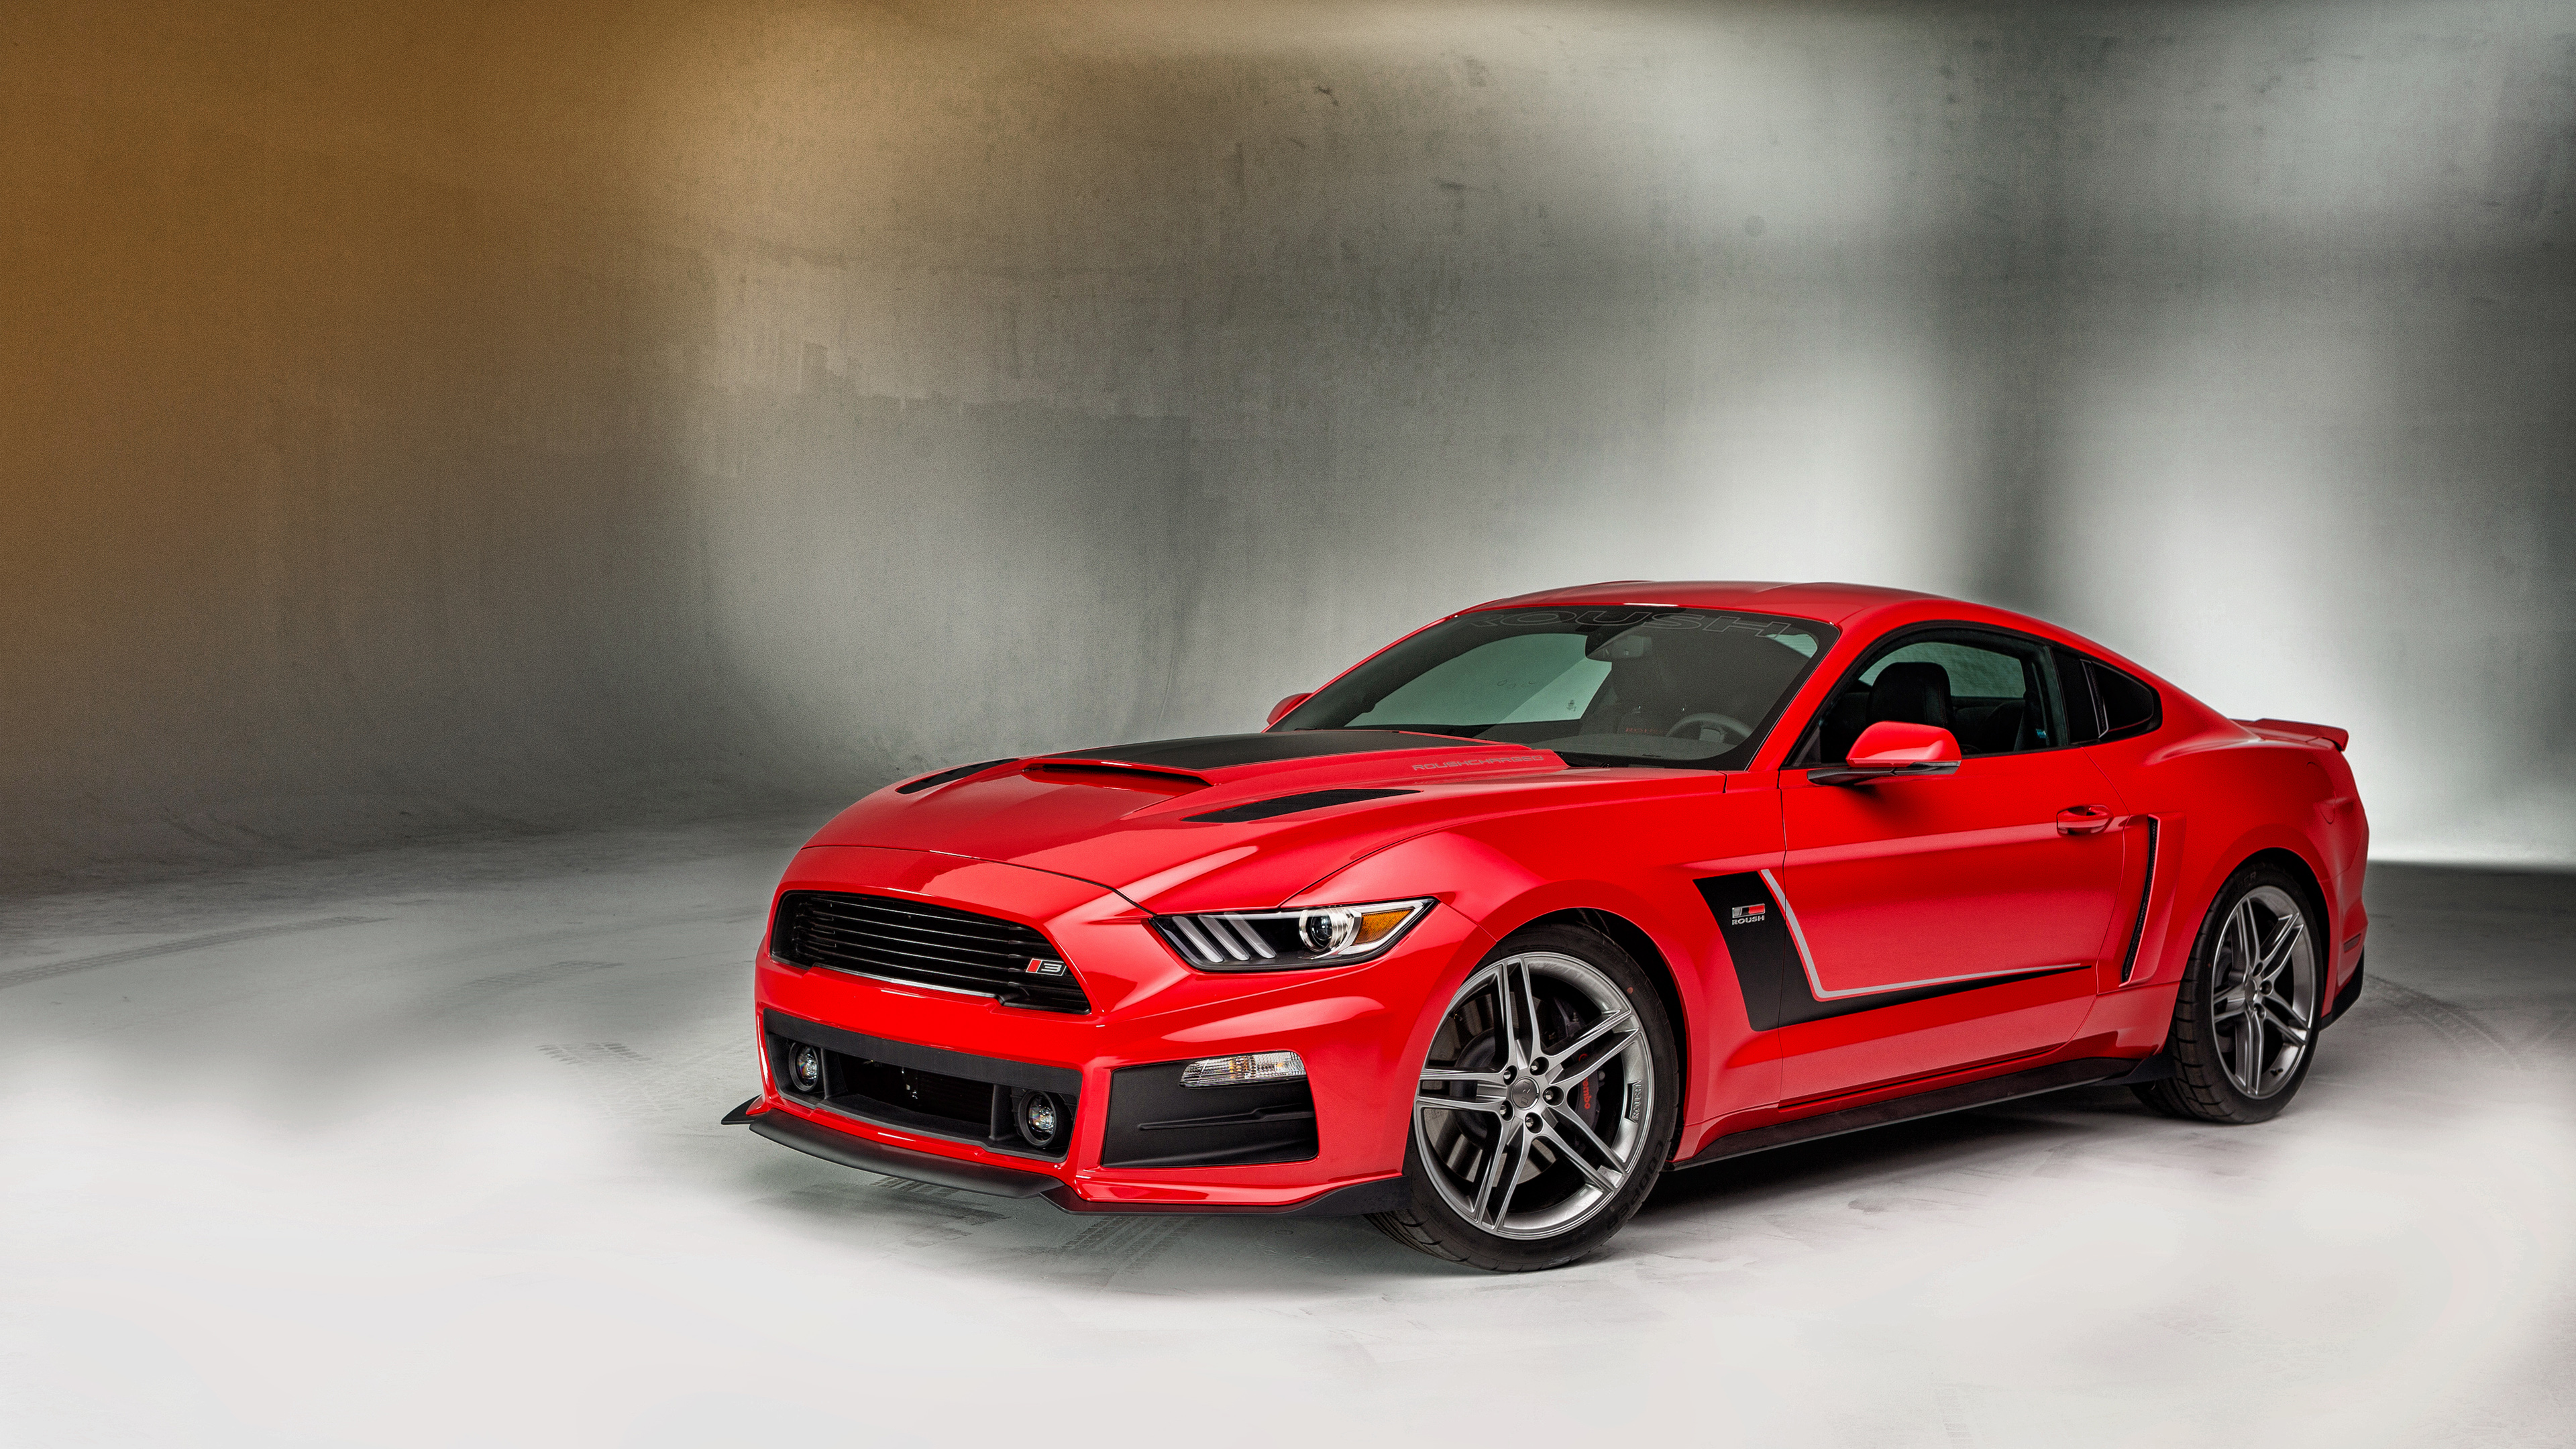 Roush Ford Mustang RS 2015 Wallpaper  HD Car Wallpapers